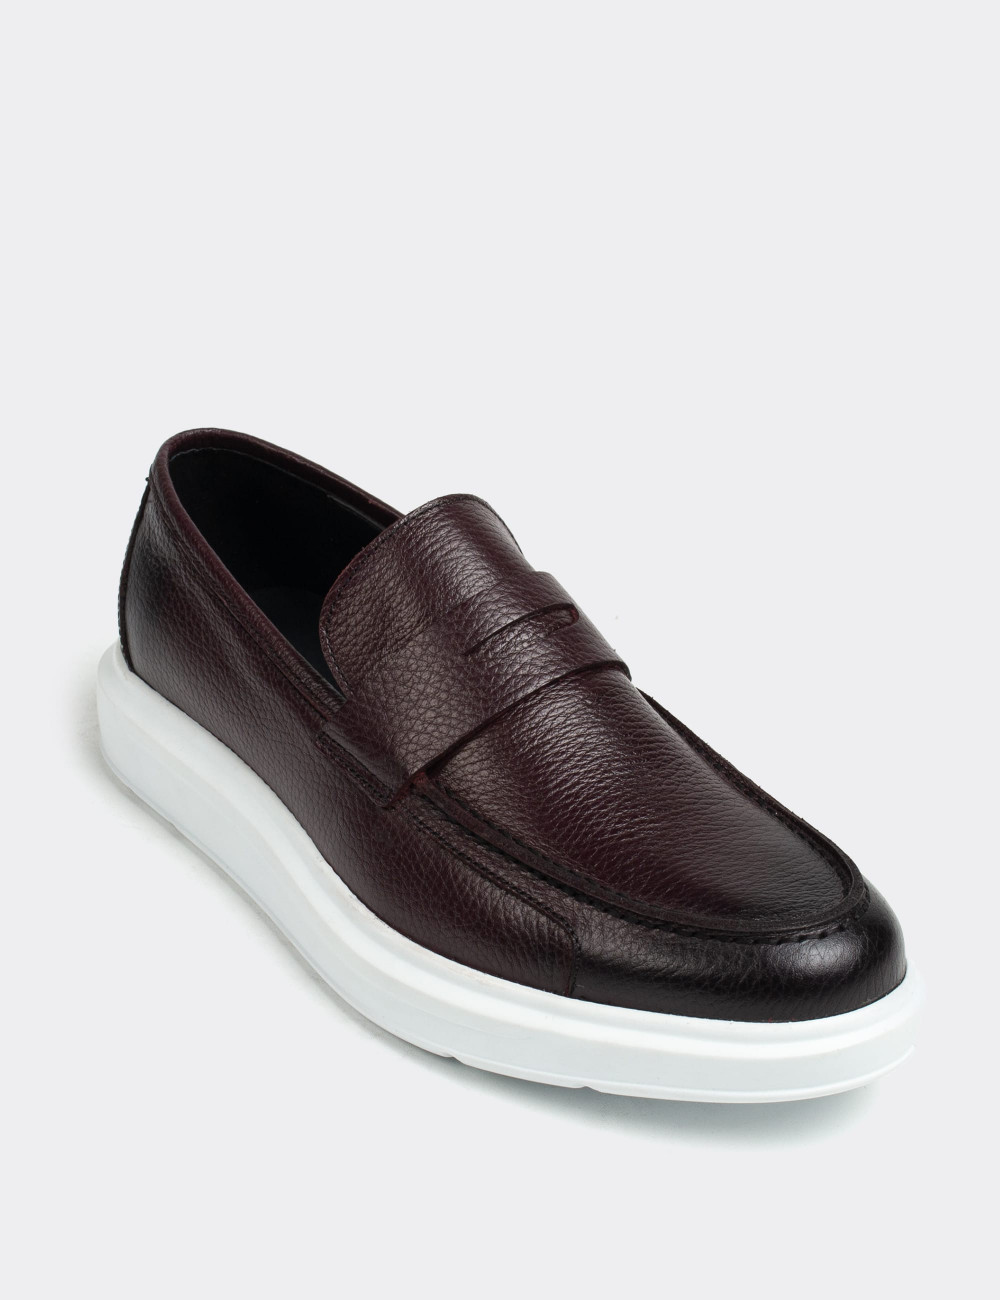 Burgundy  Leather Loafers - 01564MBRDP08